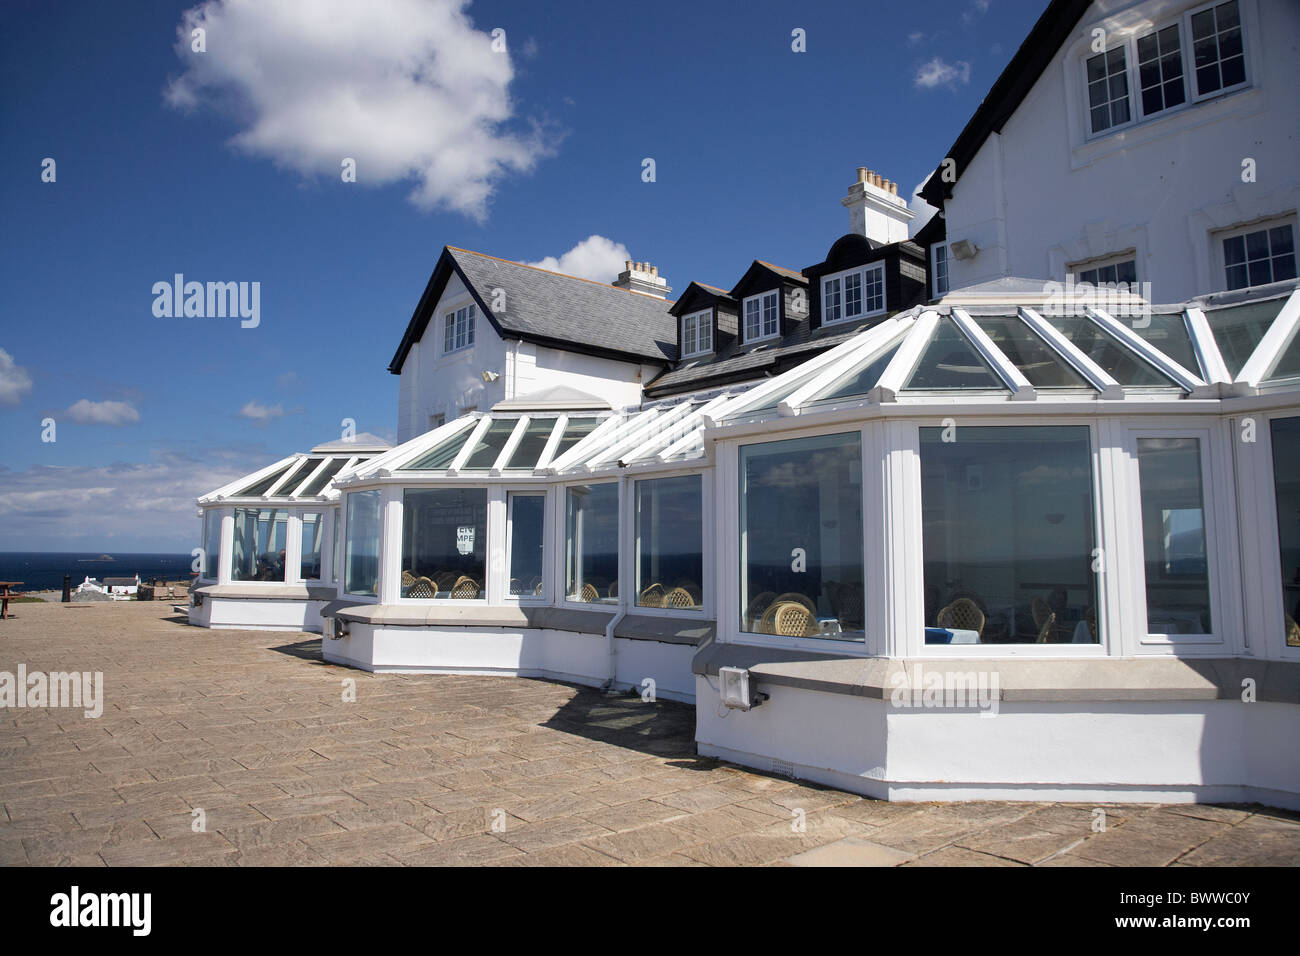 Land's End Hotel, Land's End, Cornwall, England, Regno Unito Foto Stock